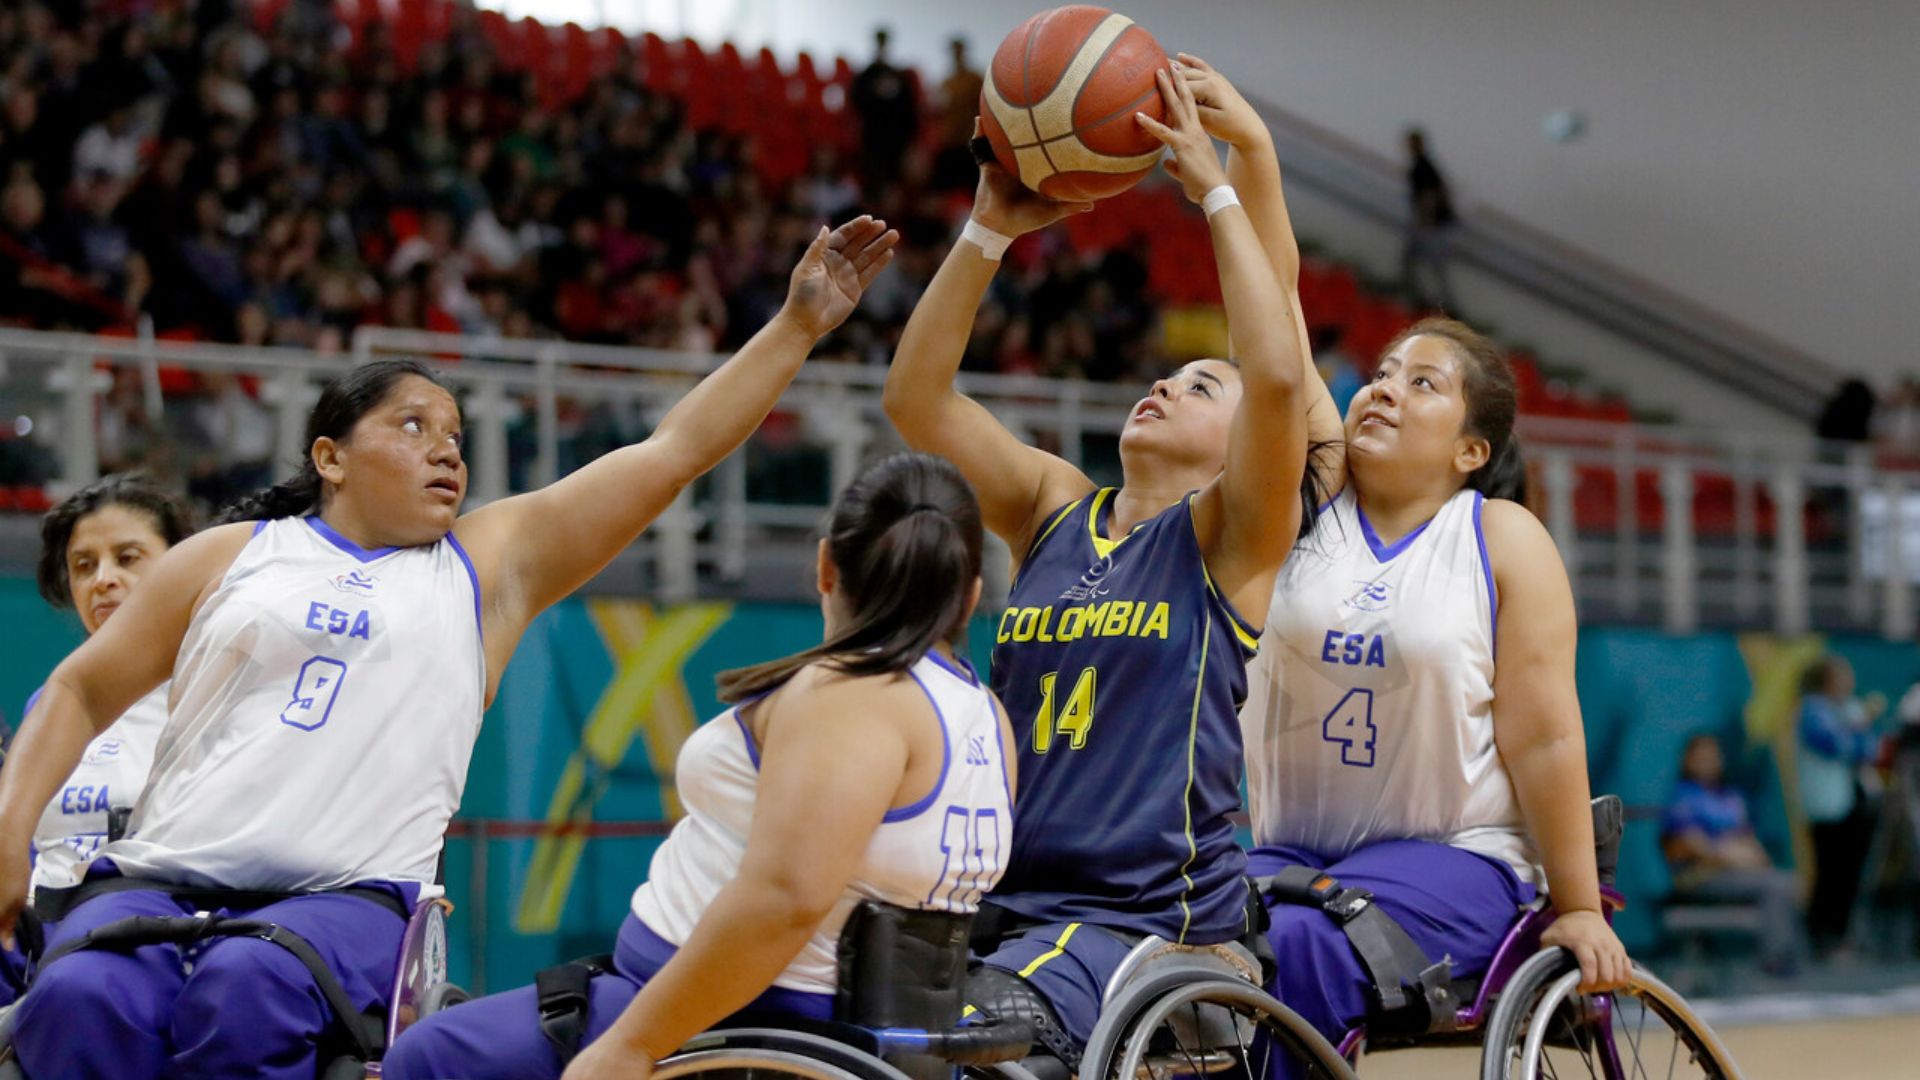 Colombia Defeat El Salvador and is Hopeful in Wheelchair Basketball